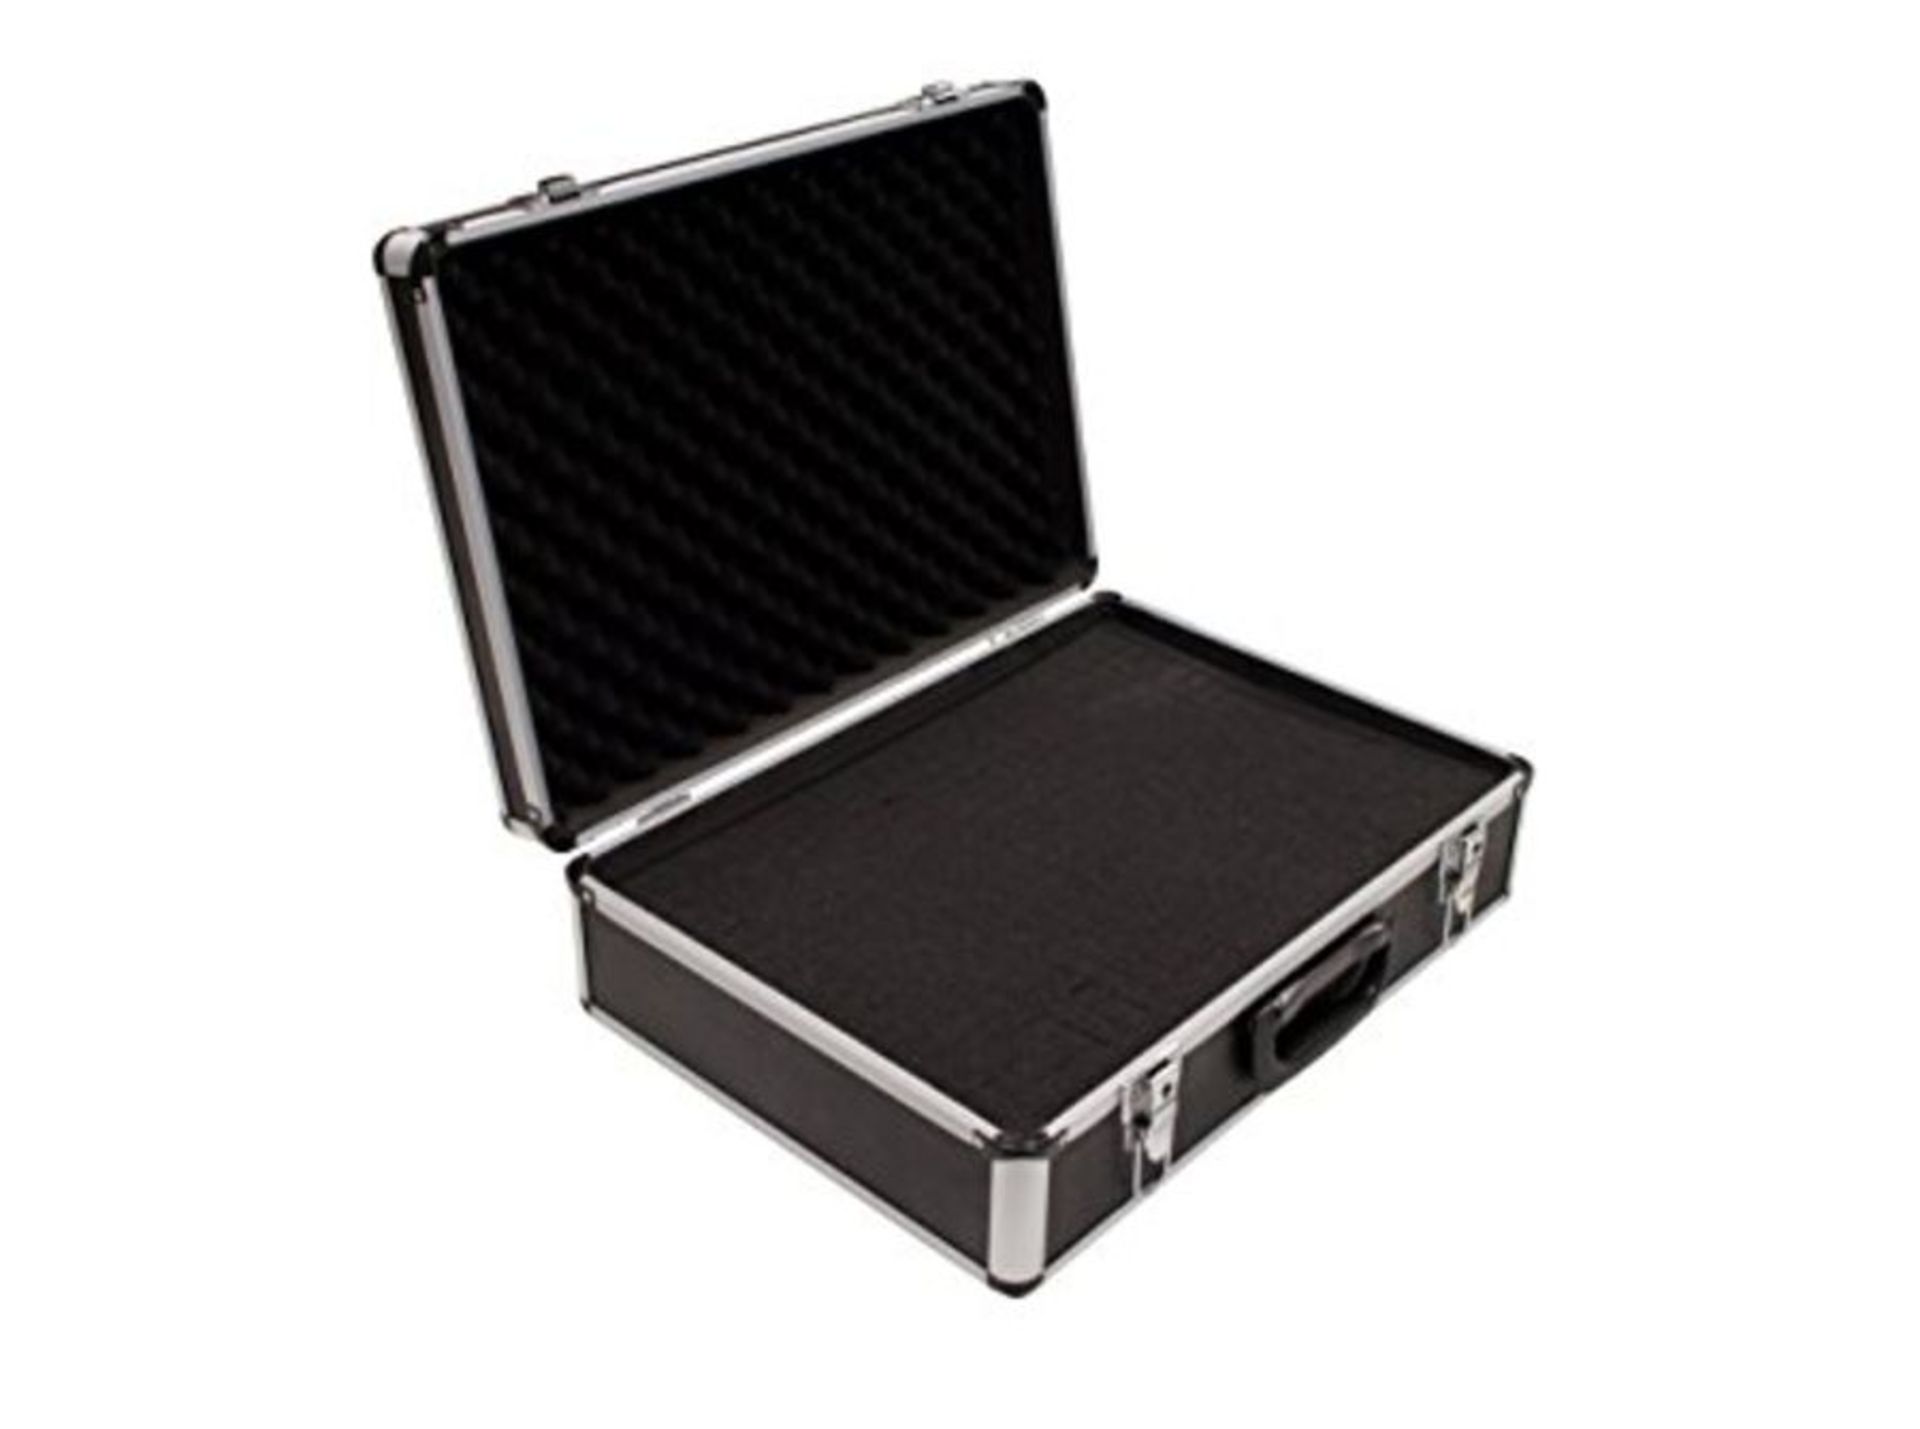 RRP £53.00 PeakTech 7310  Flight Case with padded foam, Lockable Storage Toolbox, Portable Alu